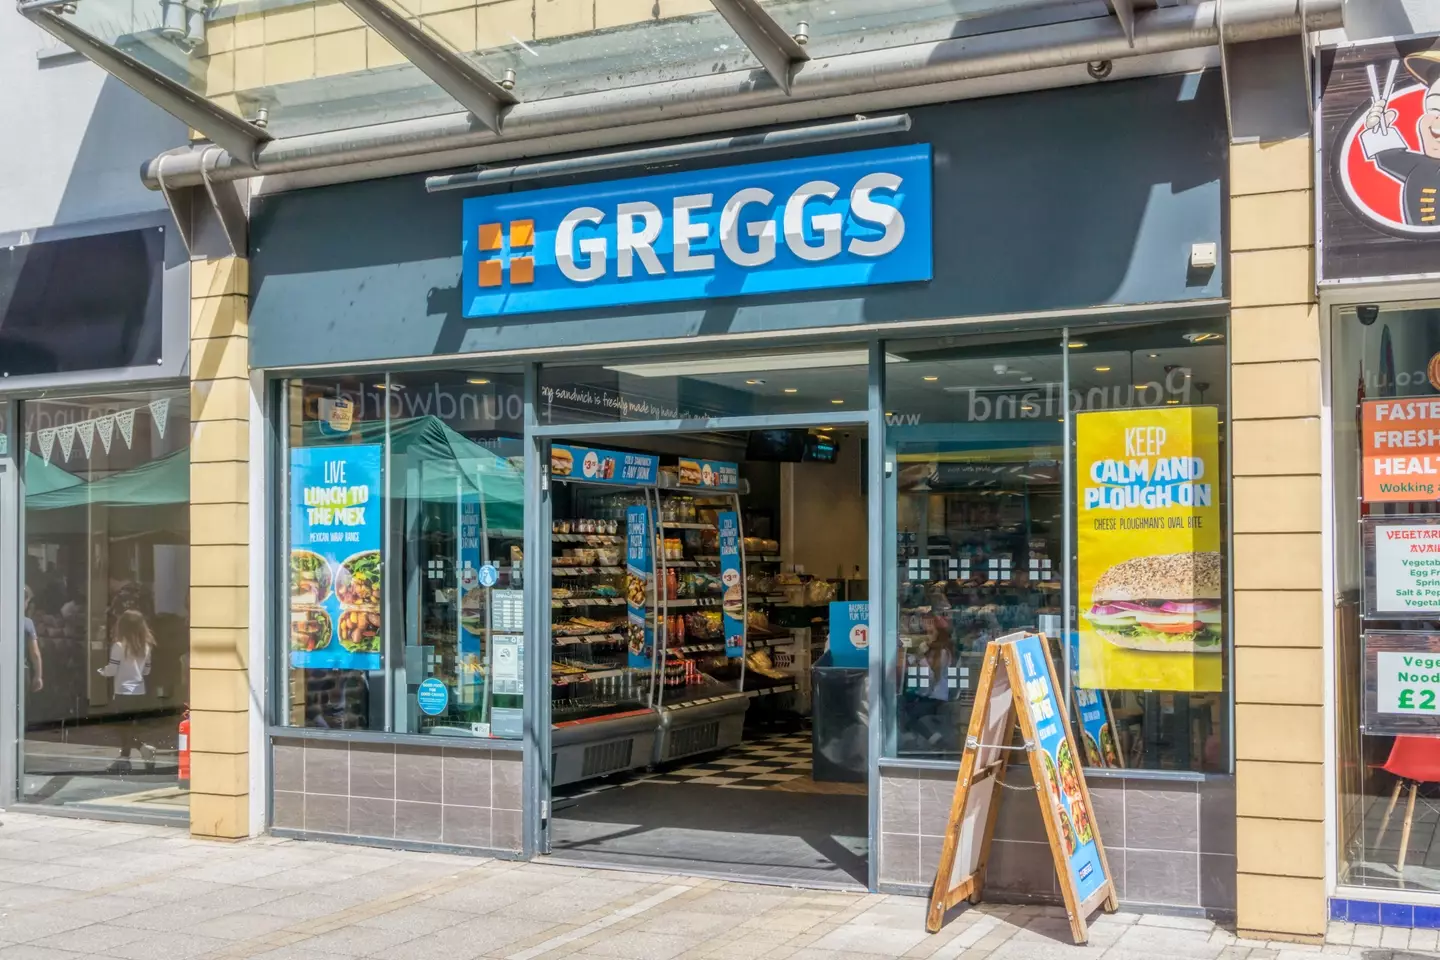 Greggs is giving out free sausage rolls for the Queen's Jubilee.